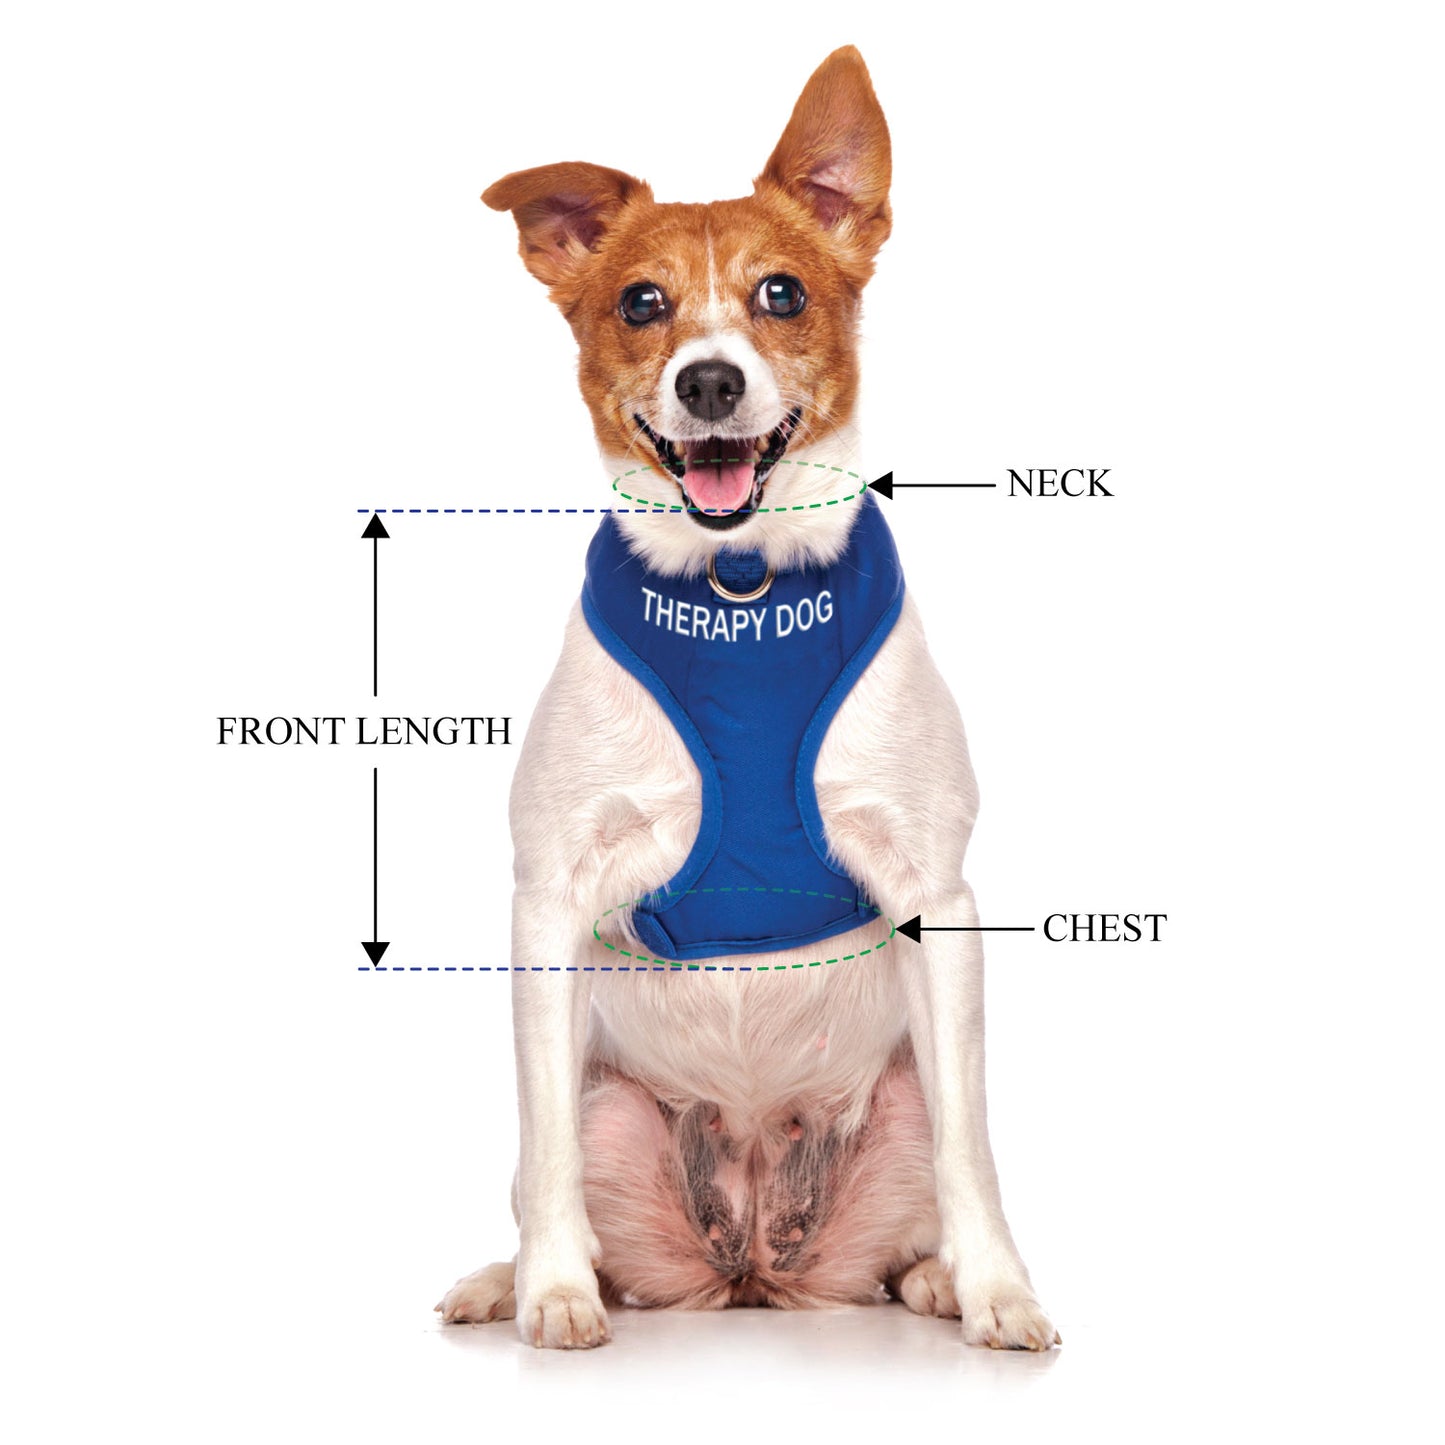 THERAPY DOG - Small adjustable Vest Harness